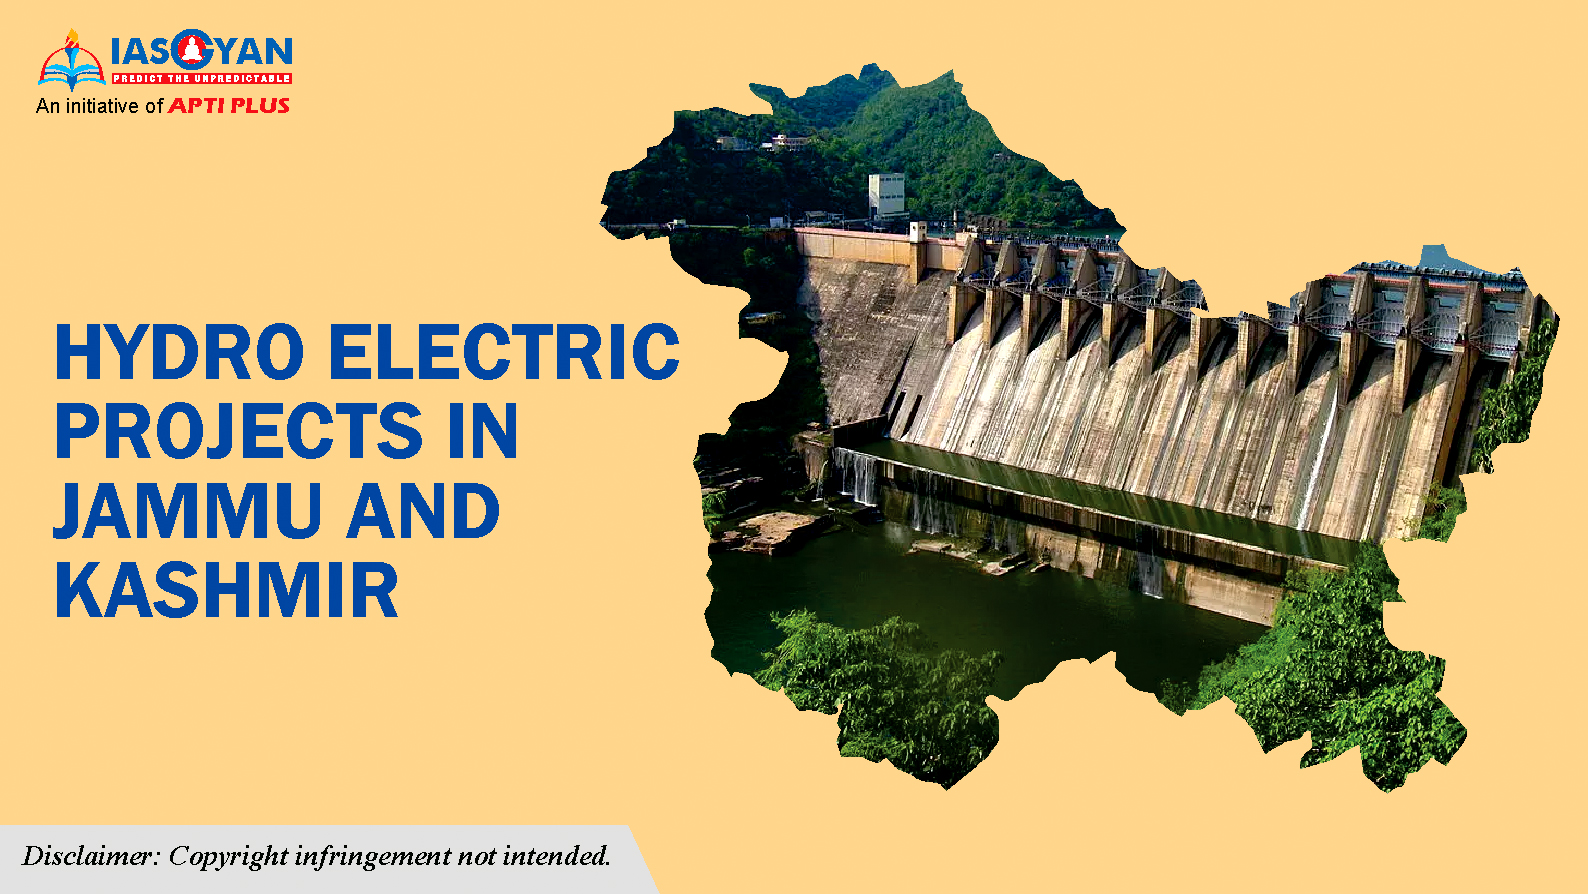 HYDRO ELECTRIC PROJECTS IN JAMMU AND KASHMIR